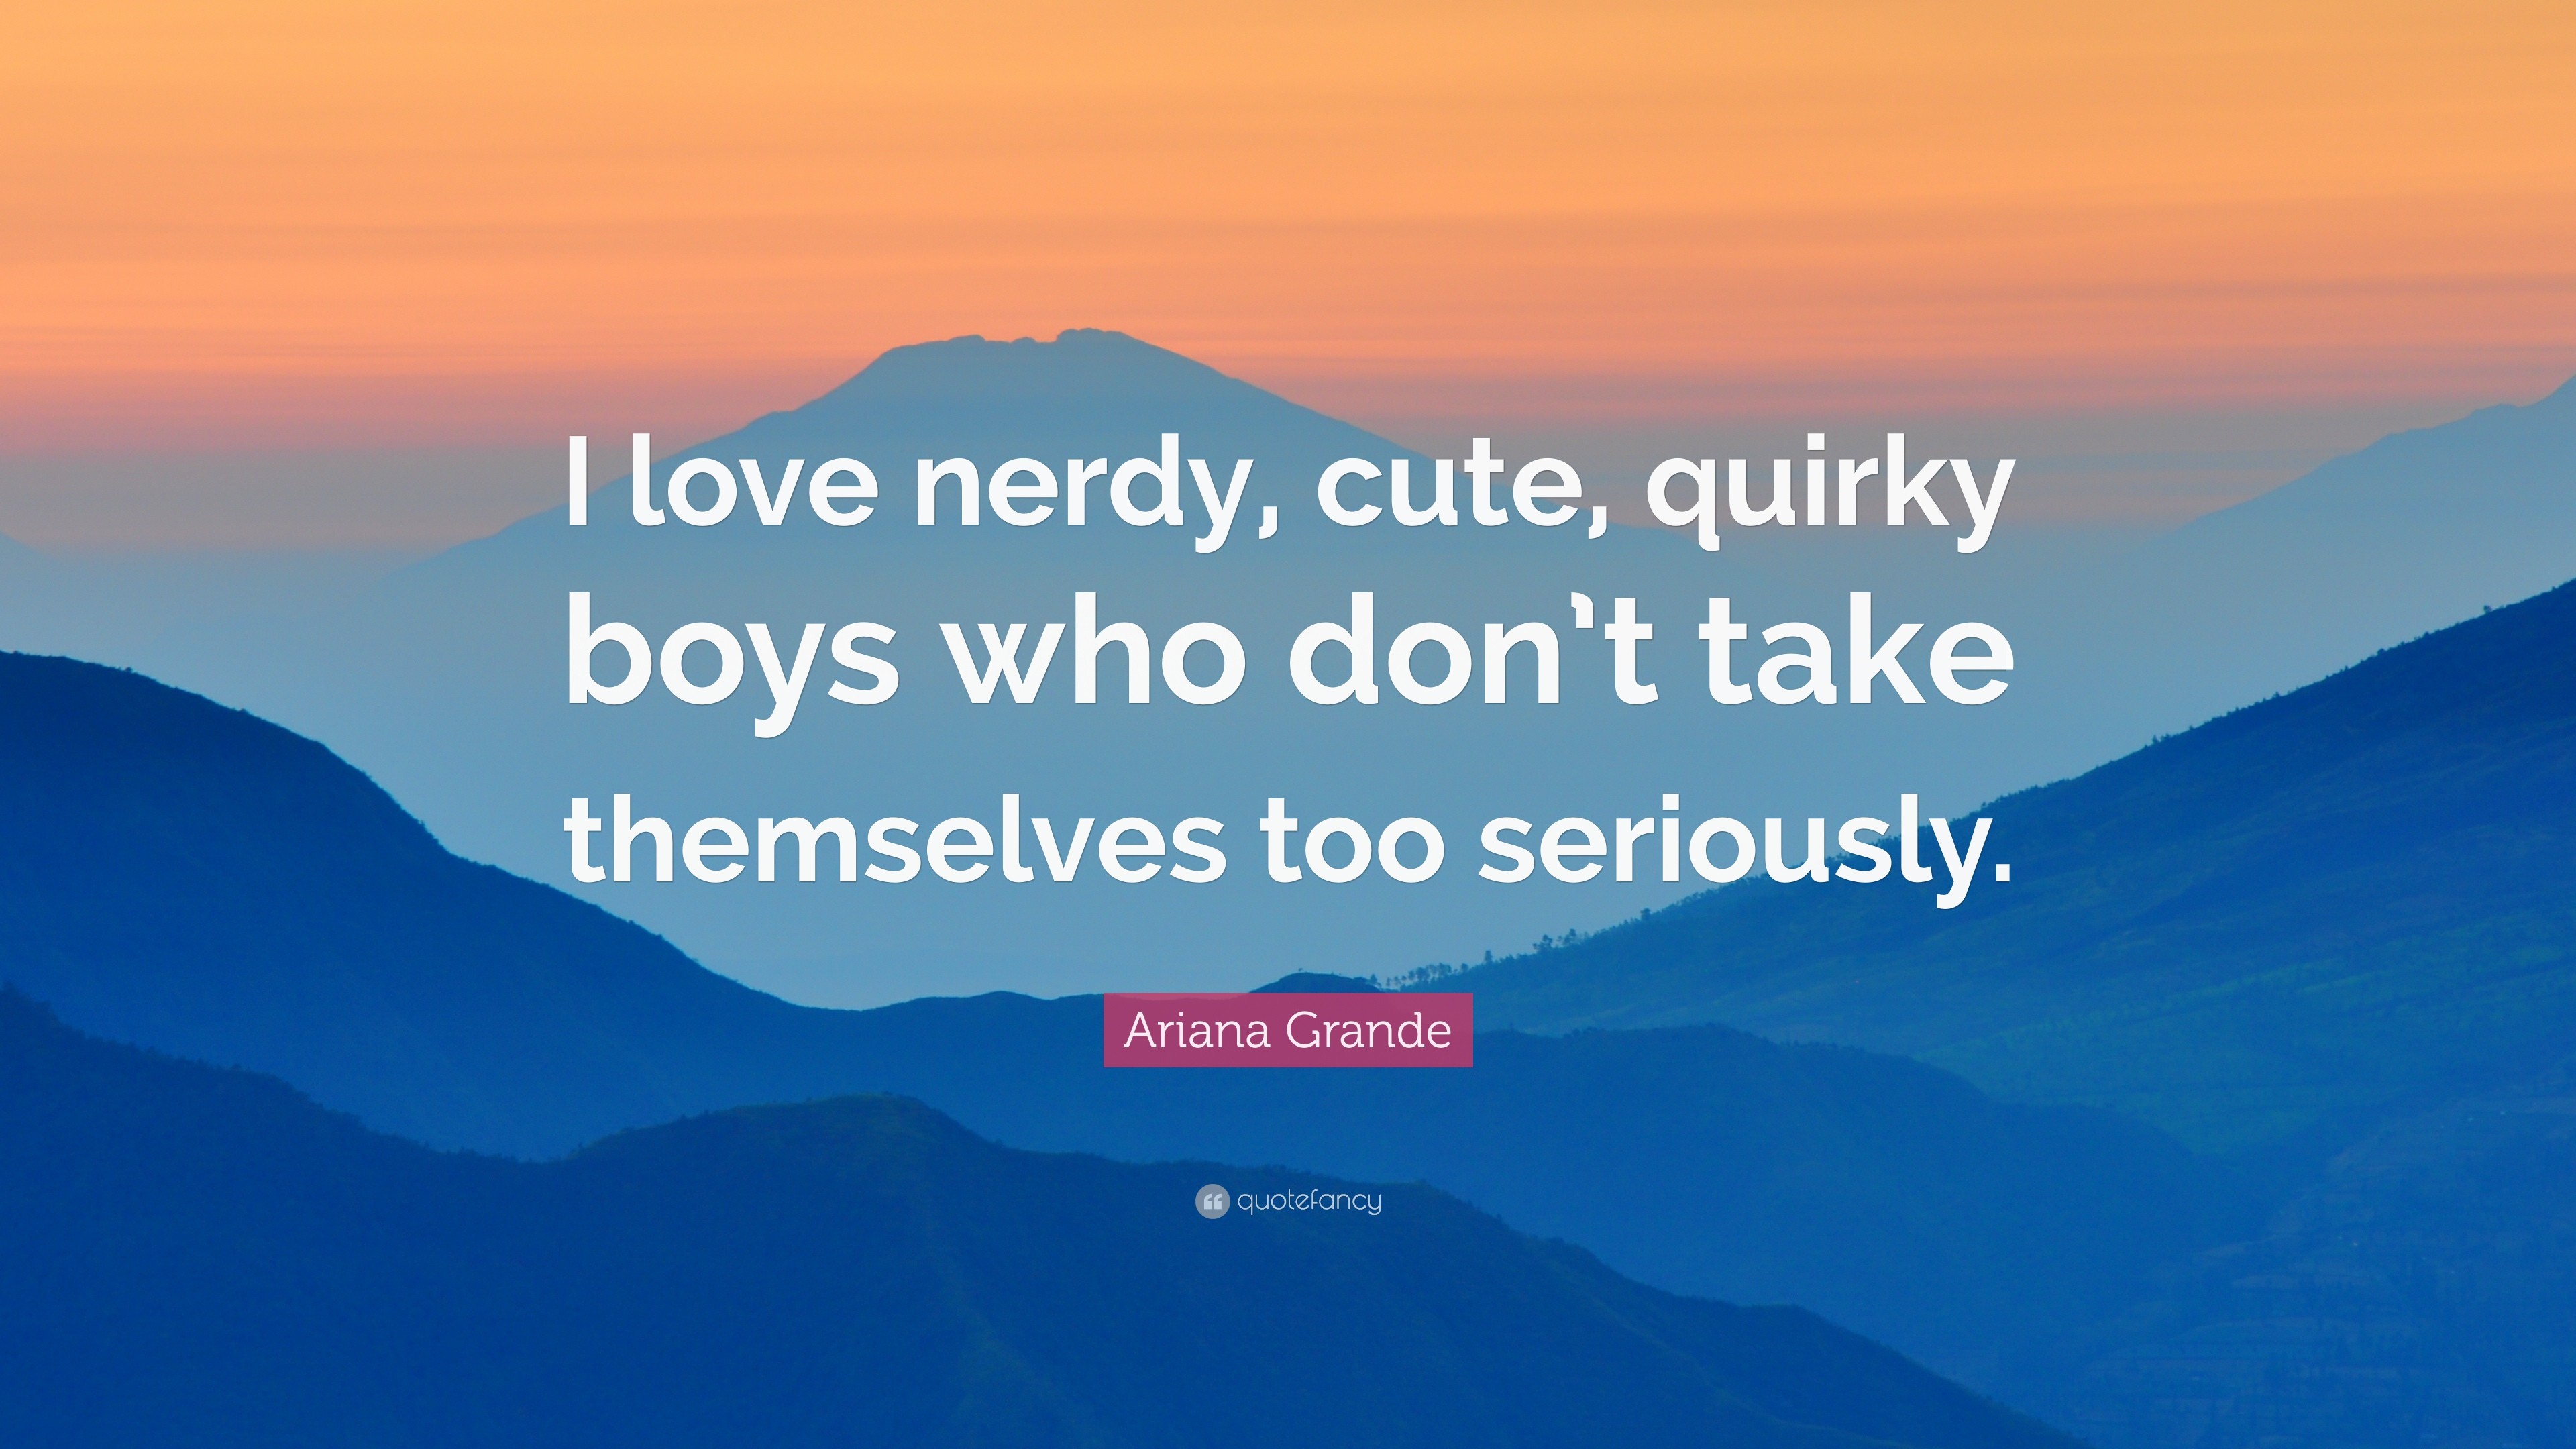 3840x2160 Ariana Grande Quote: “I love nerdy, cute, quirky boys who don'